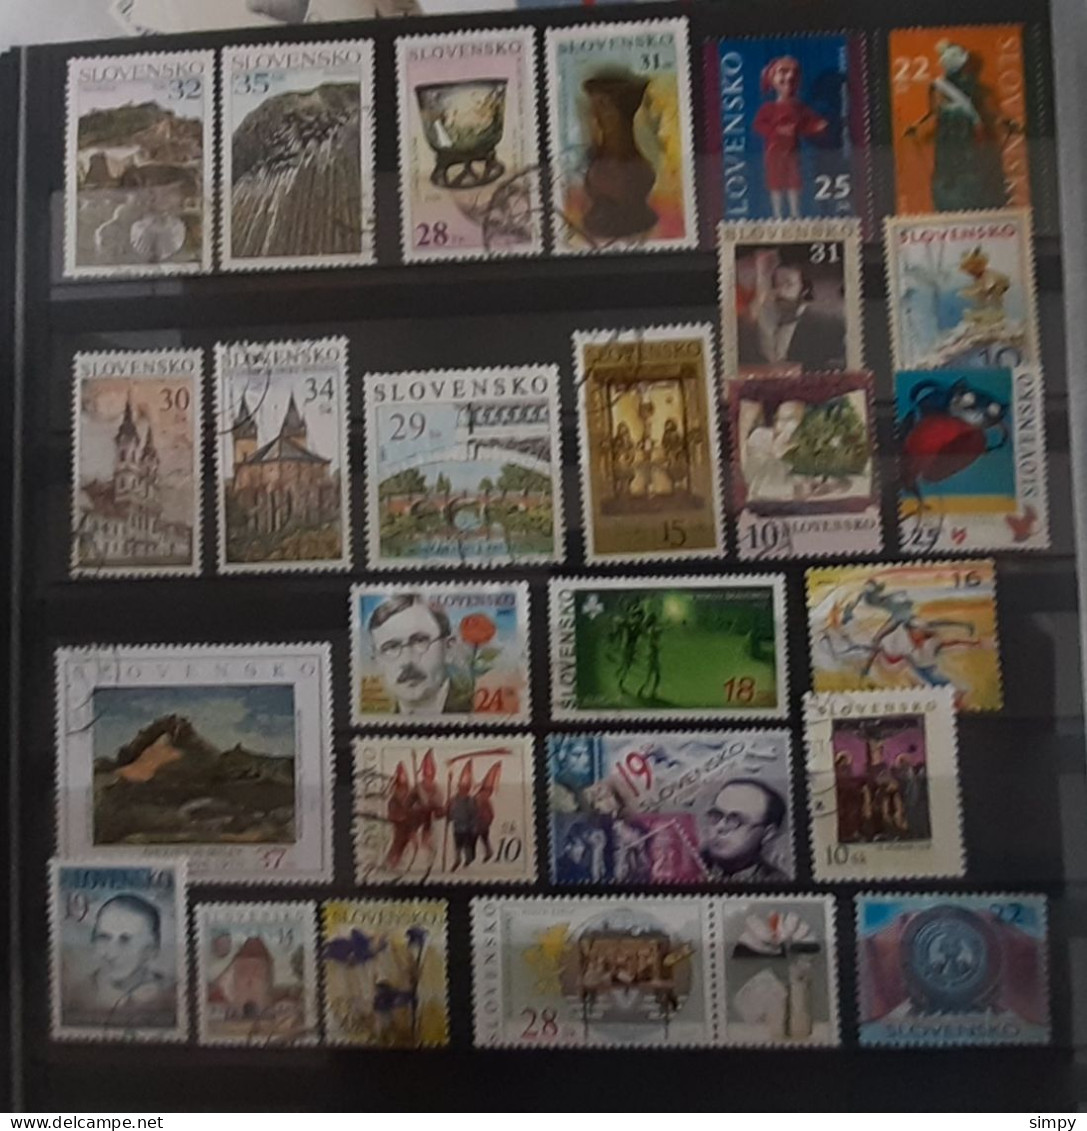 SLOVAKIA 2007 Lot Of Used Stamps - Oblitérés